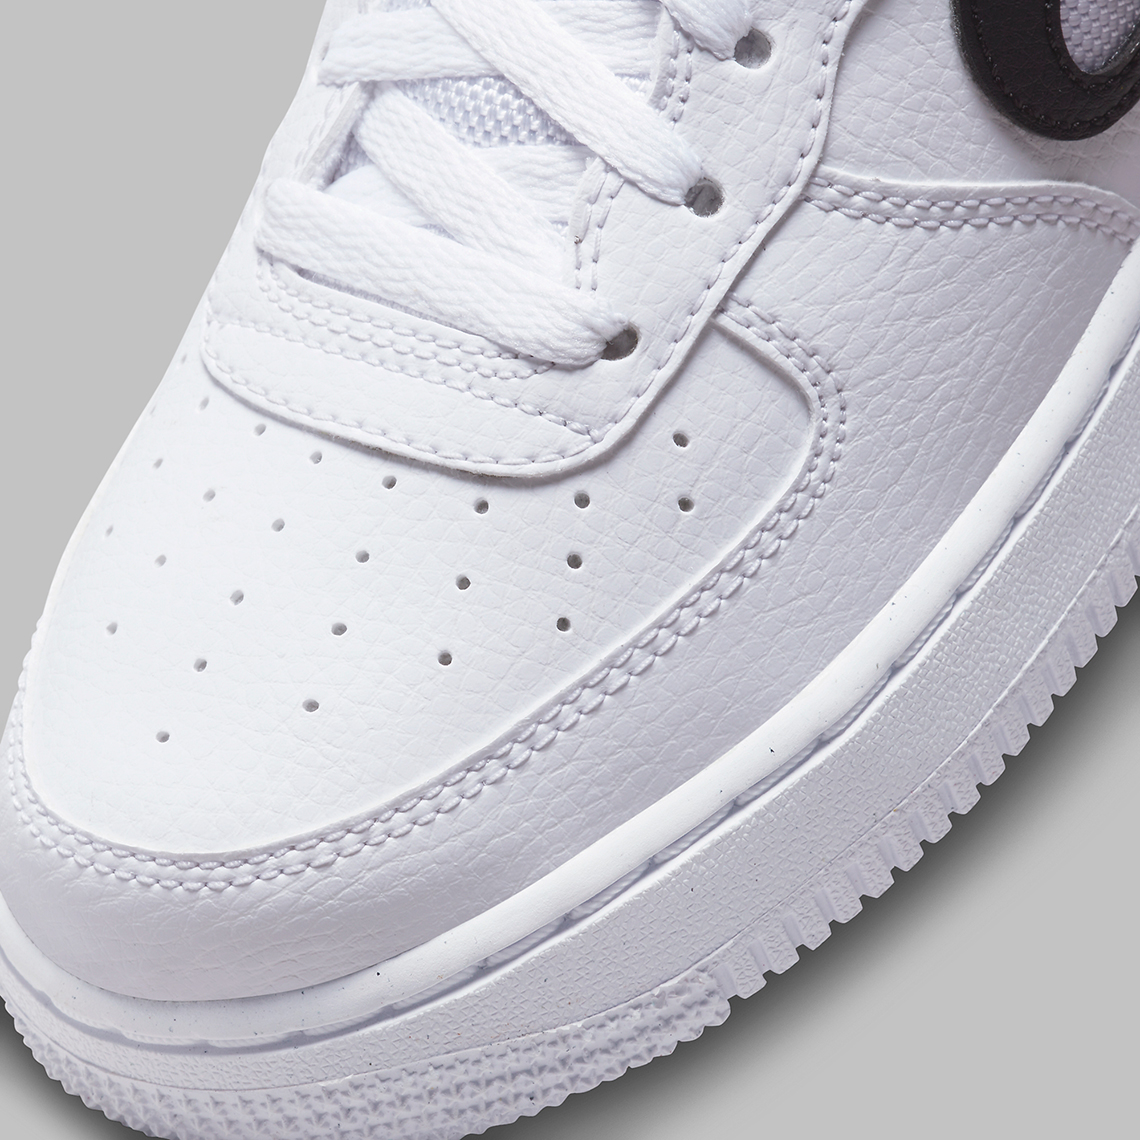 Nike Air Force 1 Low Gs White Black Dr7889 100 5